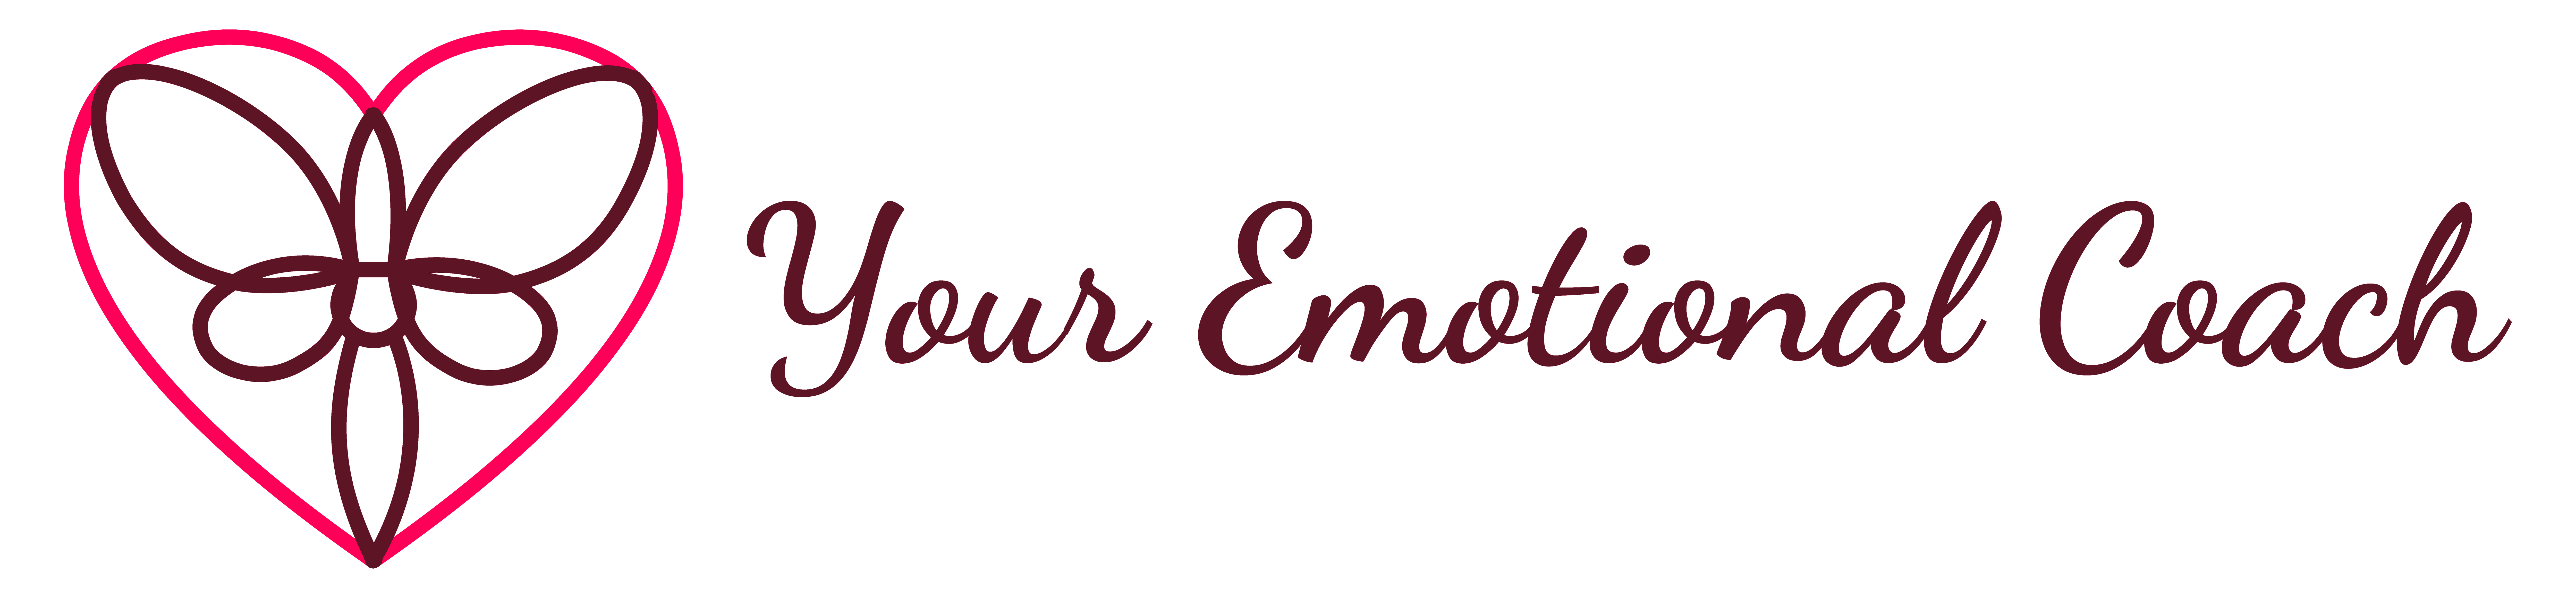 Your Emotional Coach